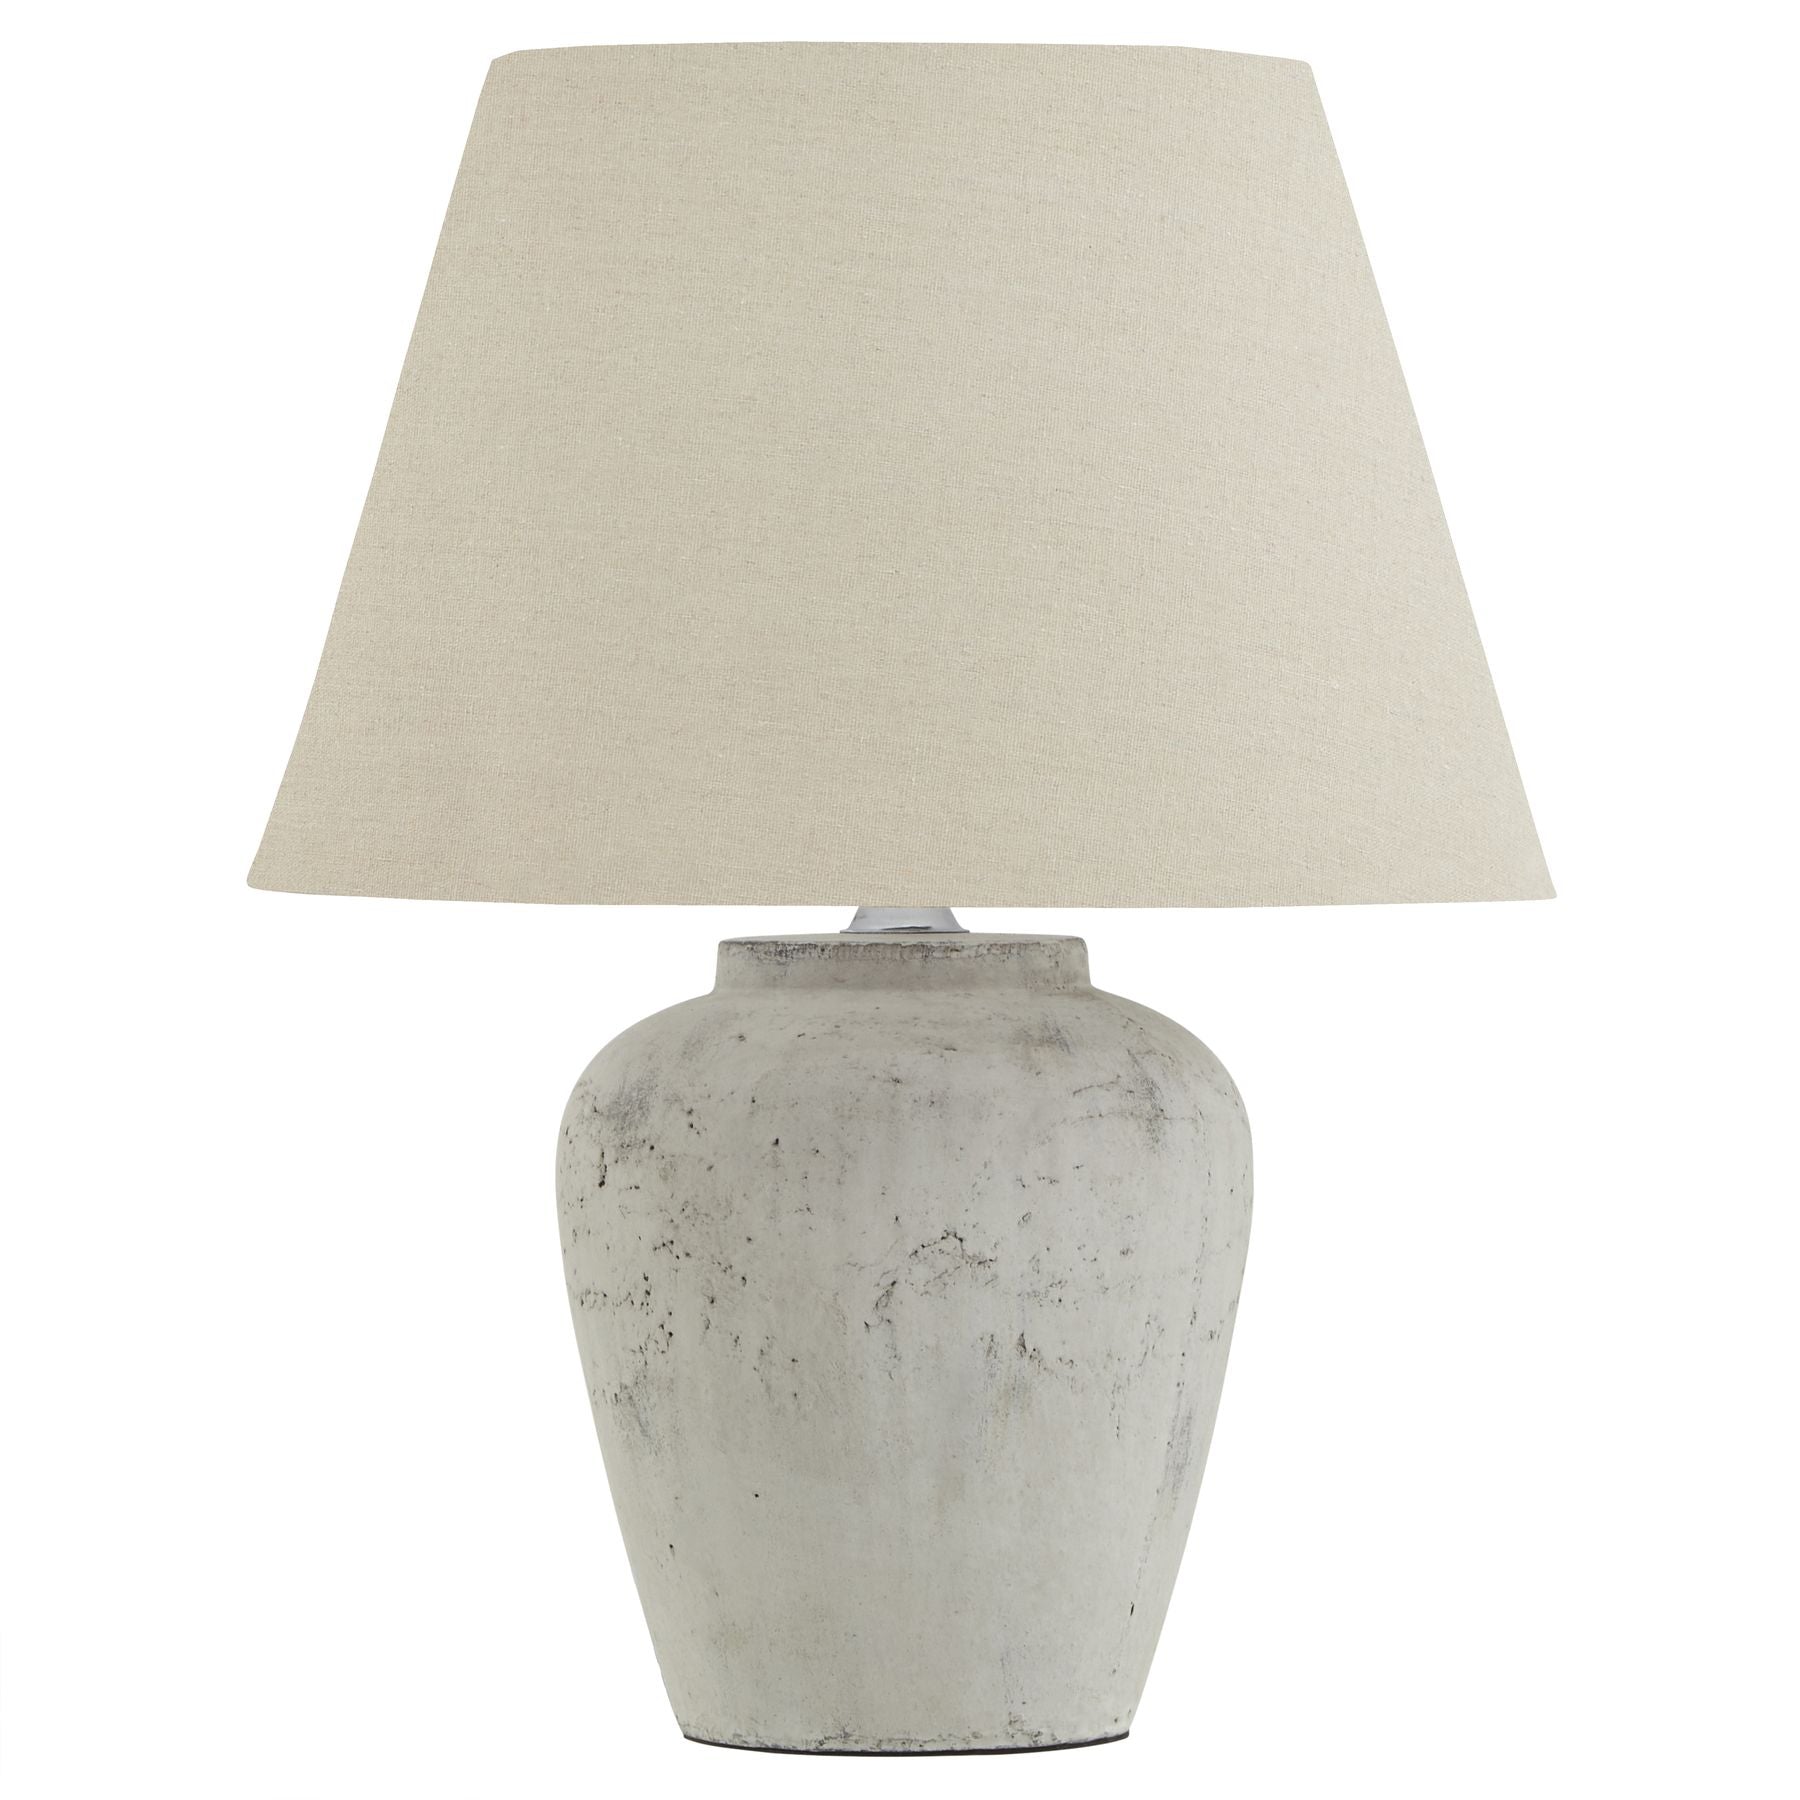 View Darcy Antique White Table Lamp With Linen Shade information